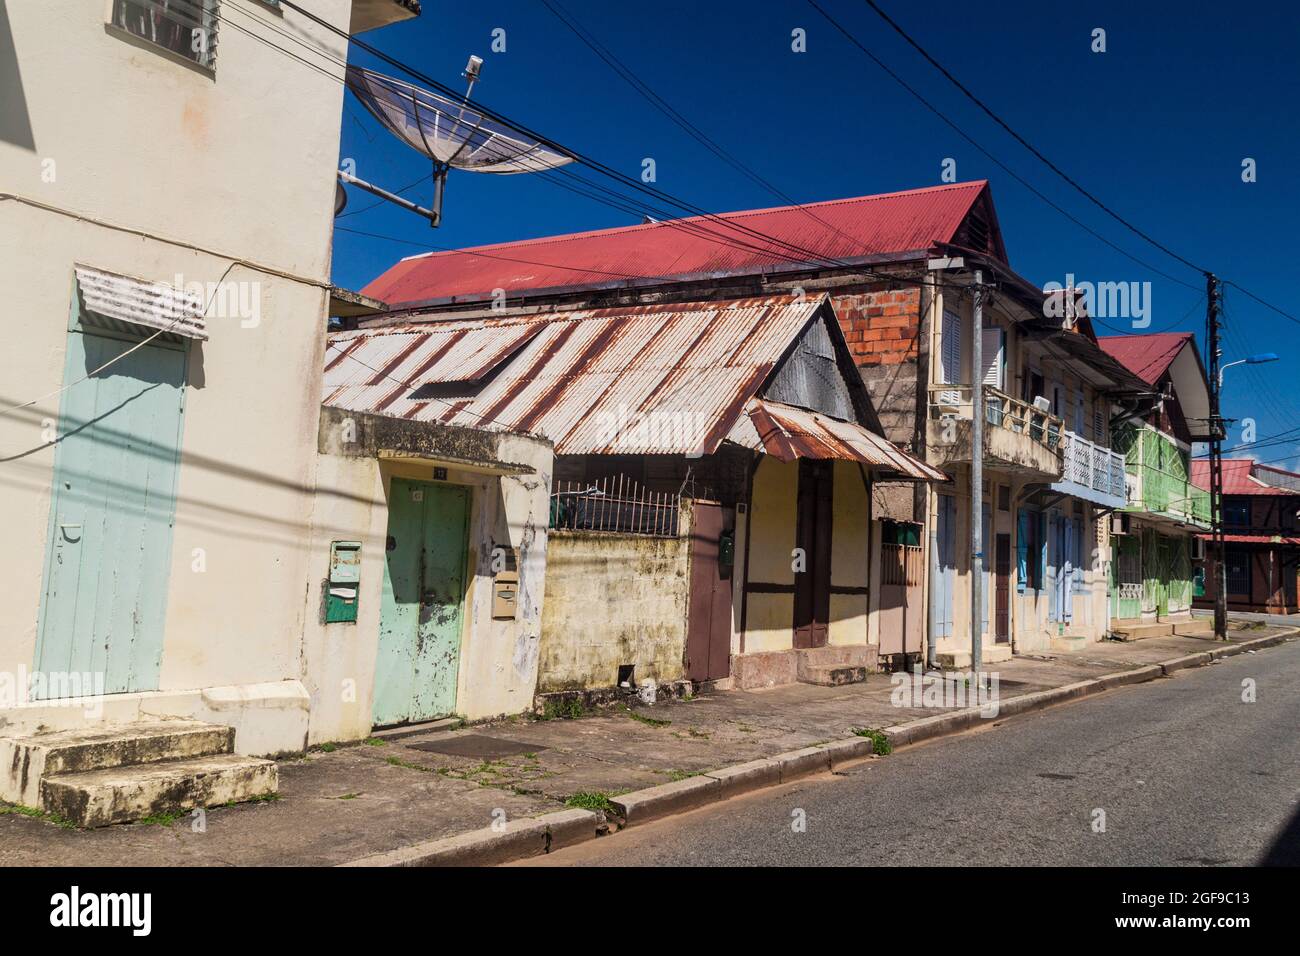 View of a street in the center of Cayenne, capital of French Guiana. Stock Photo